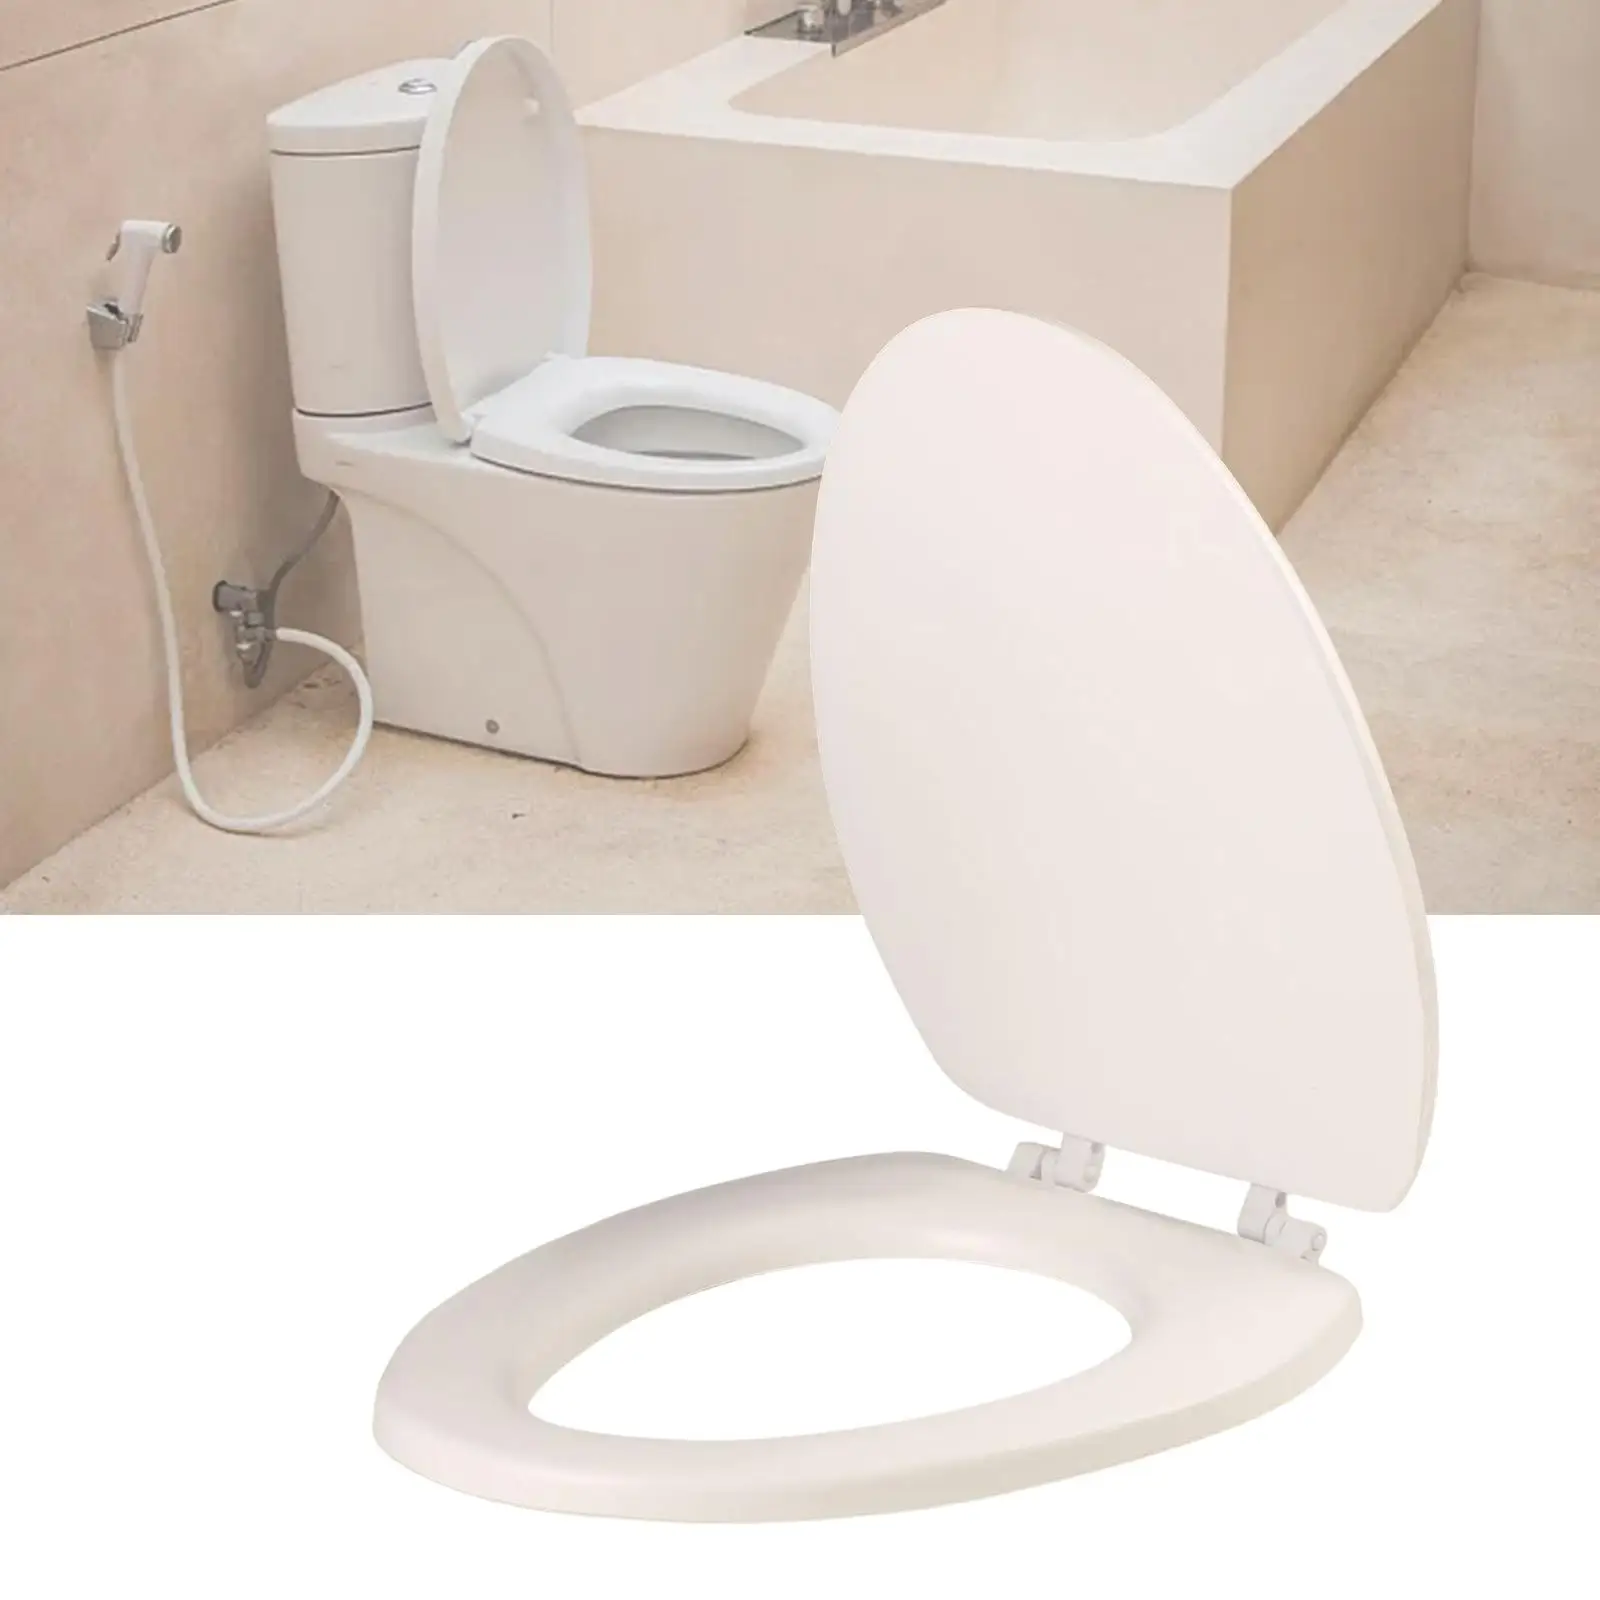 EVA Toilet Seat Cushion with Lid Durable Accessories Bathroom Supplies Waterproof Removable Reusable Washable Soft Pad Practical